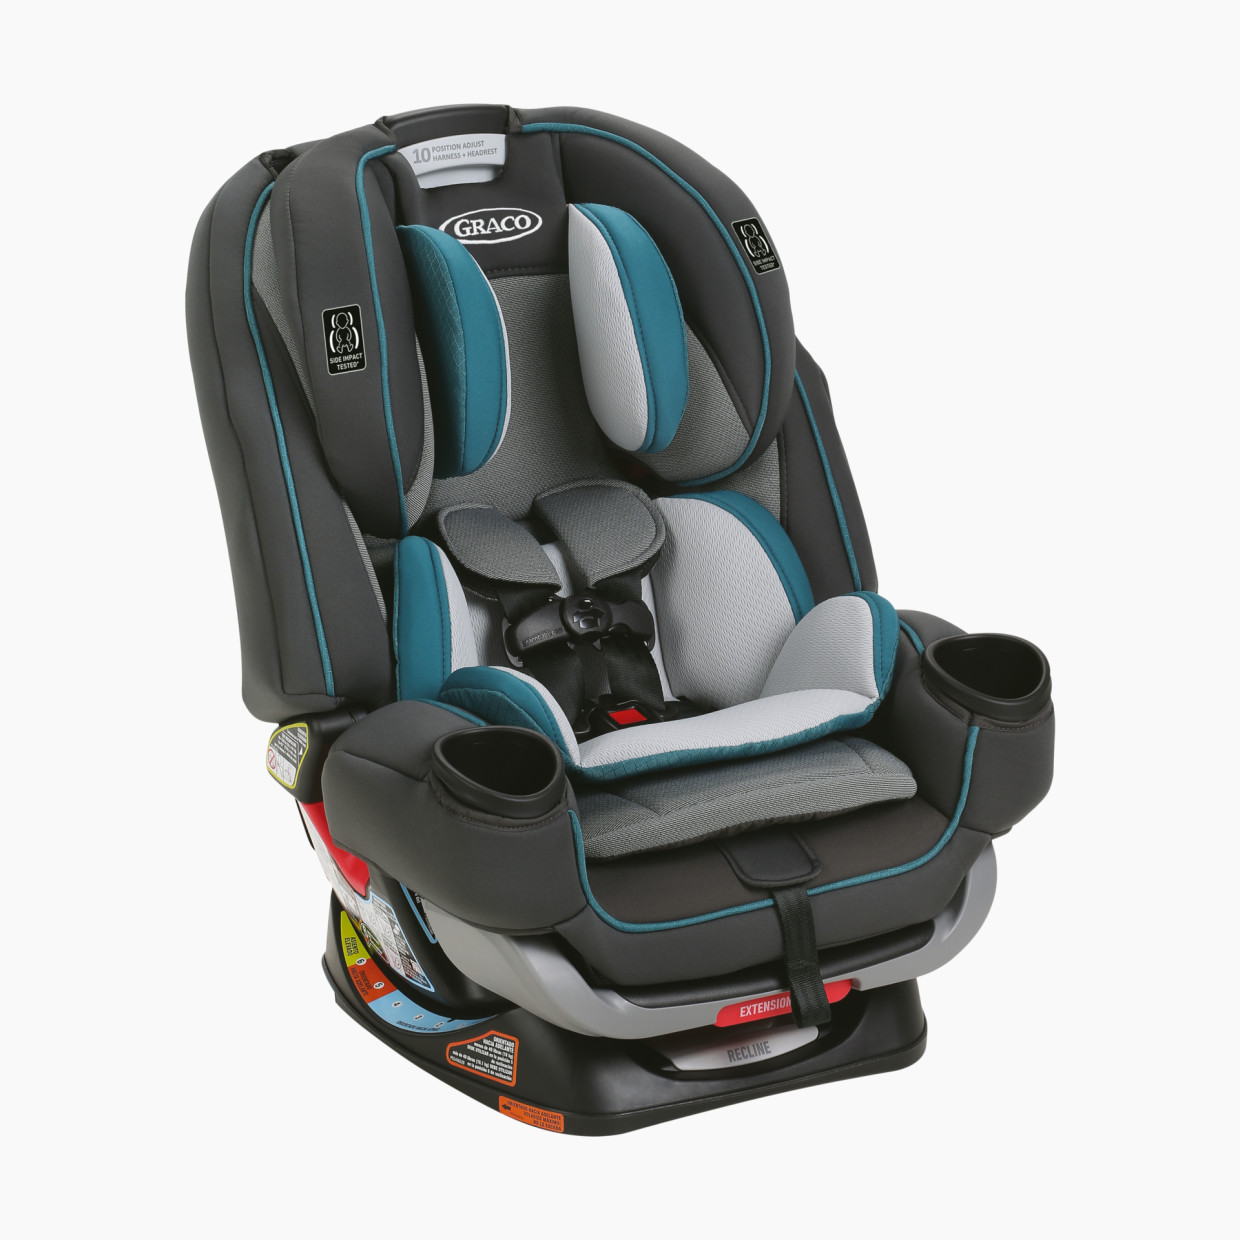 Graco 4Ever Extend2Fit 4-in-1 Convertible Car Seat - Seaton.